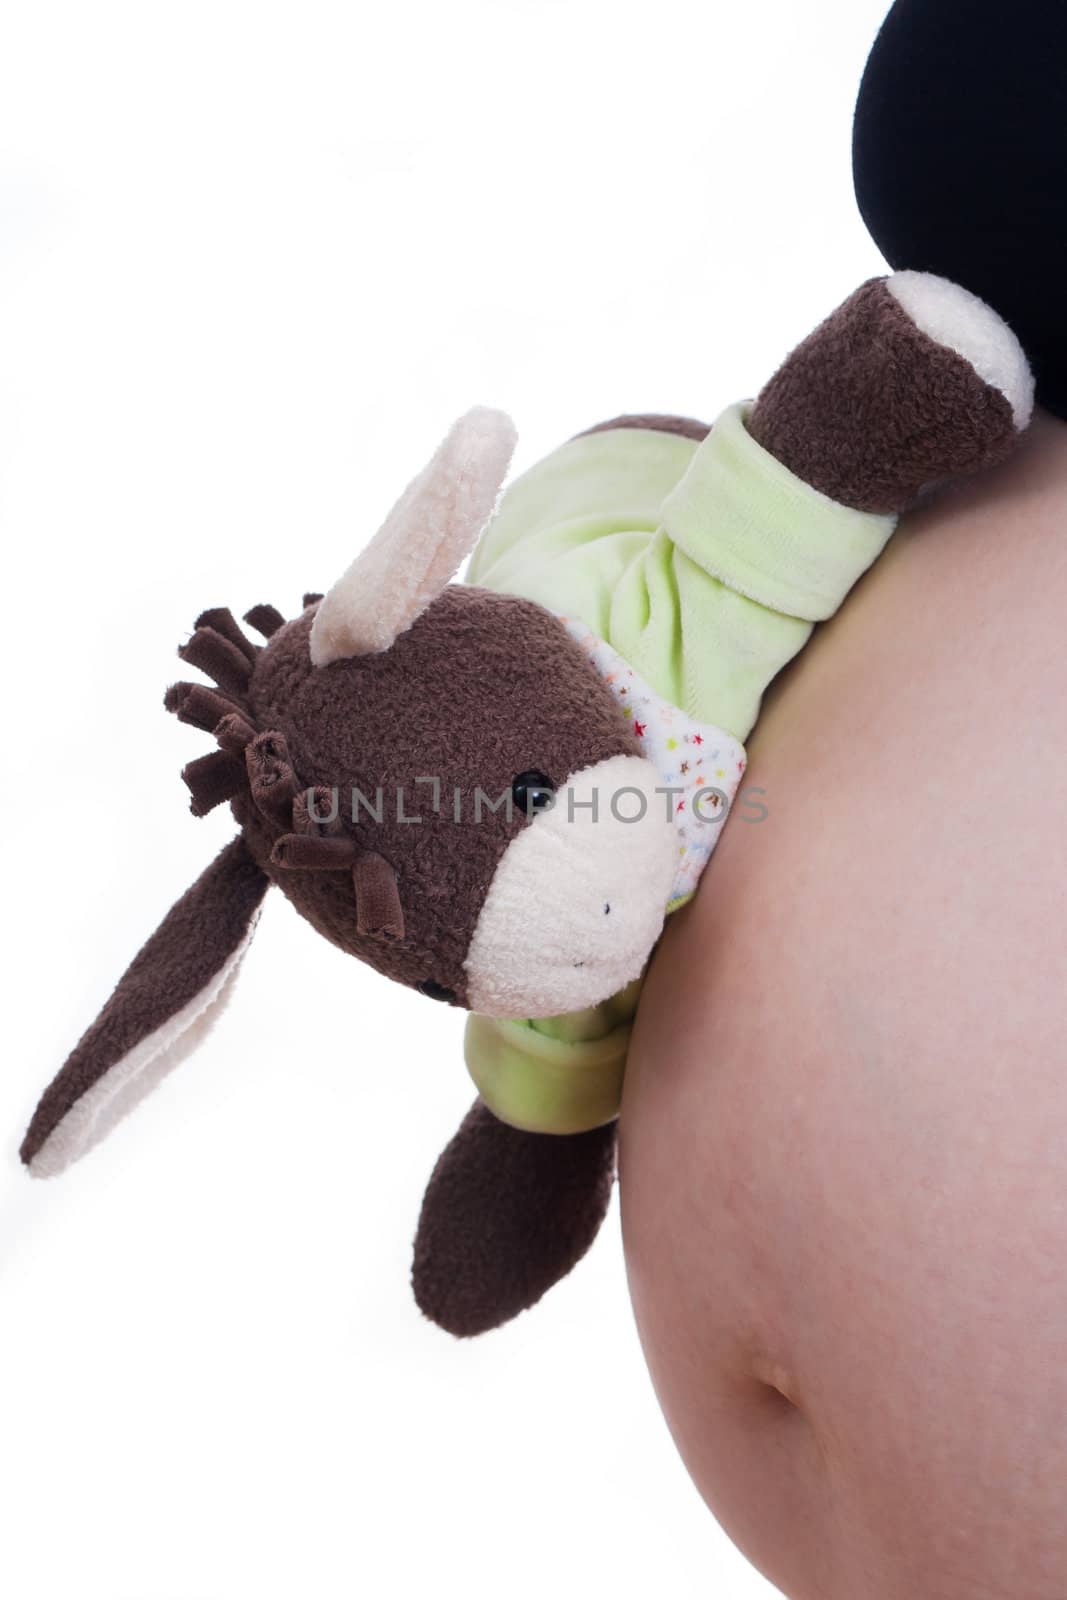 Pregnant girl showing her belly and holding a toy